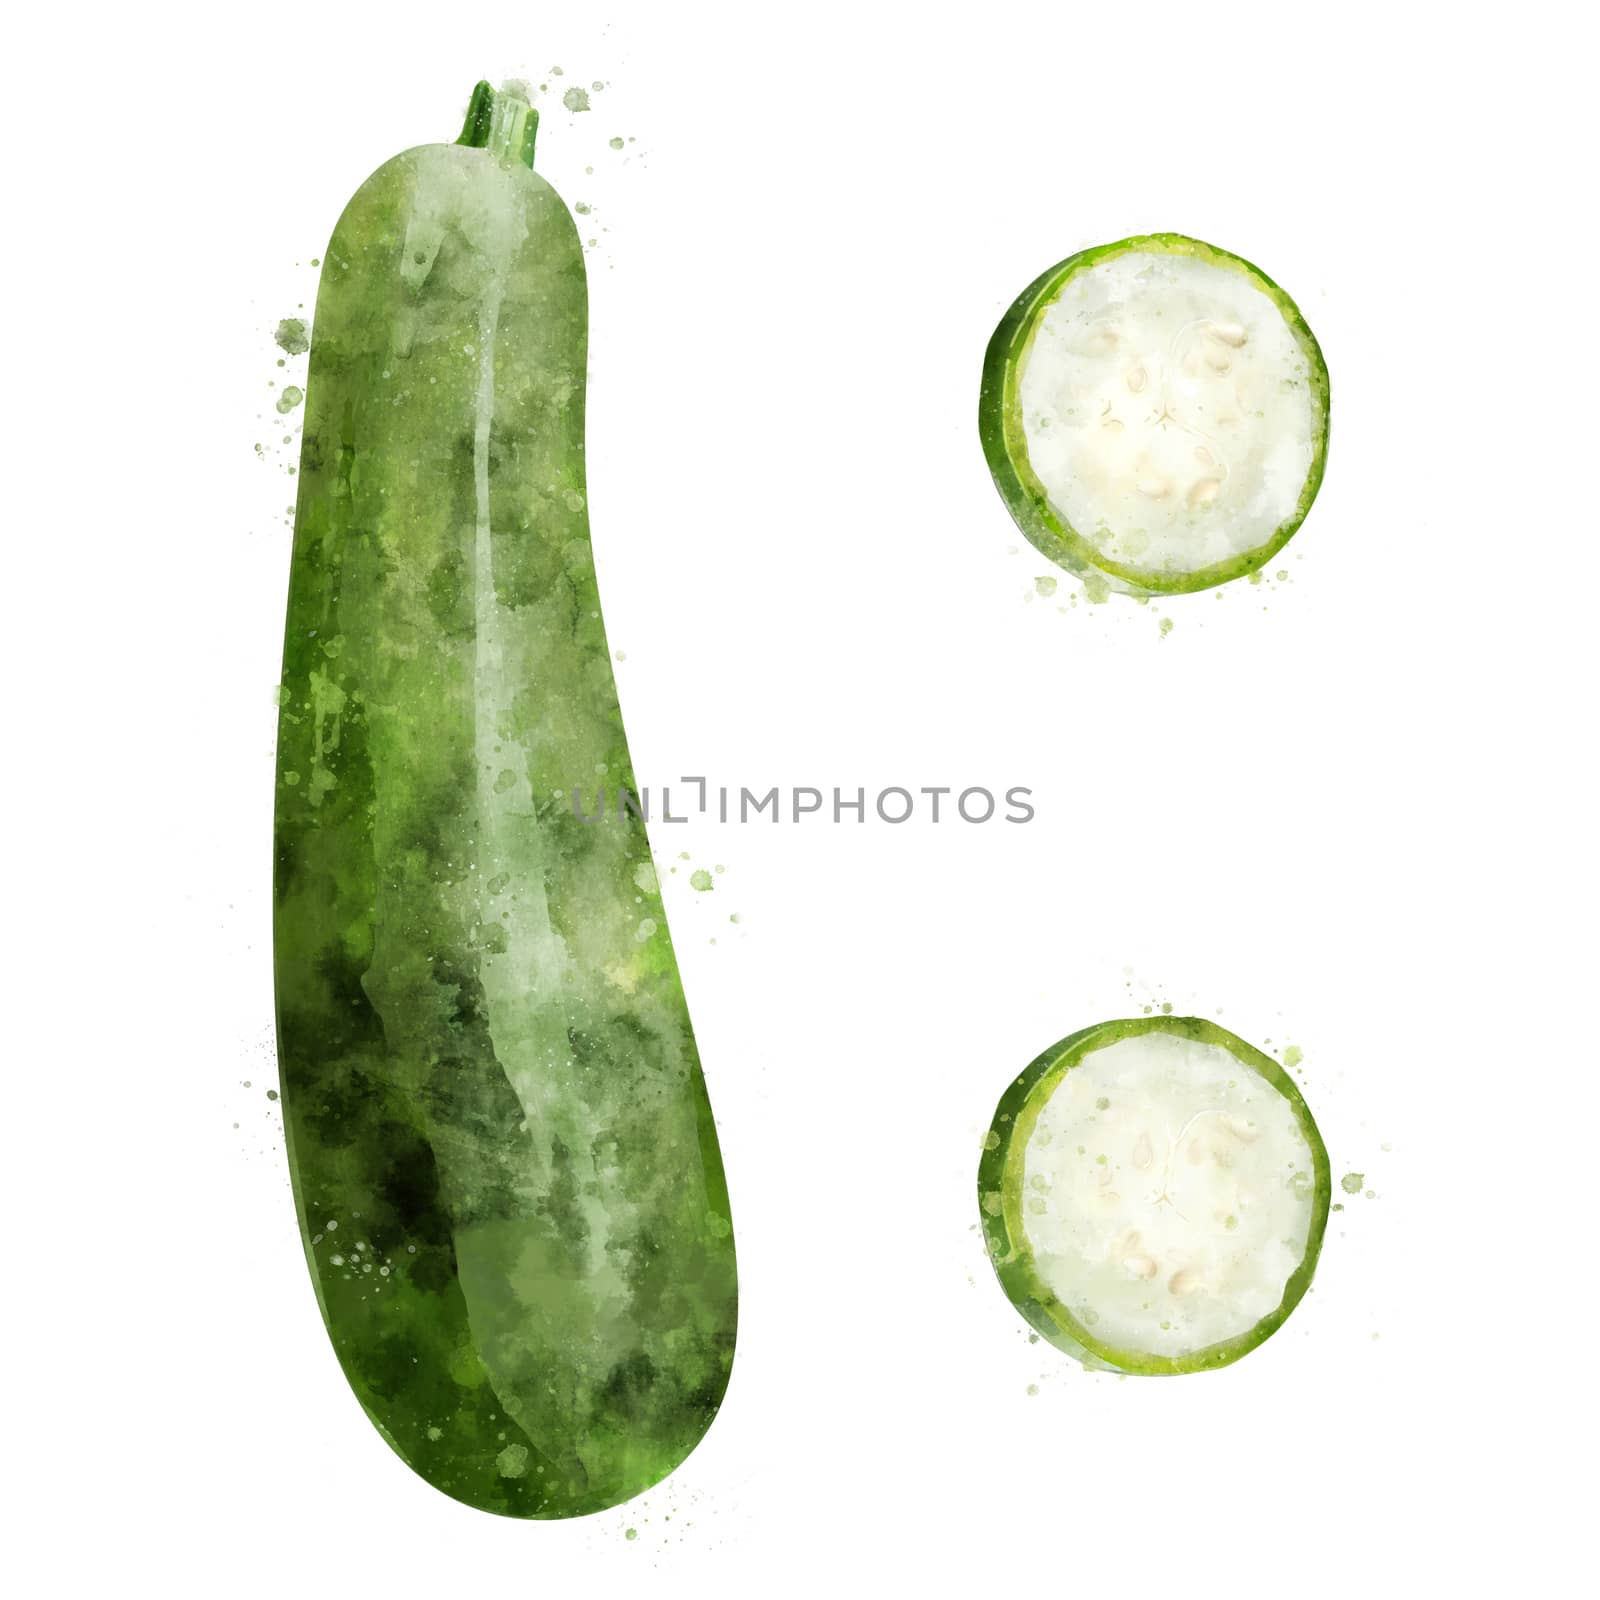 Zucchini, isolated illustration on a white background